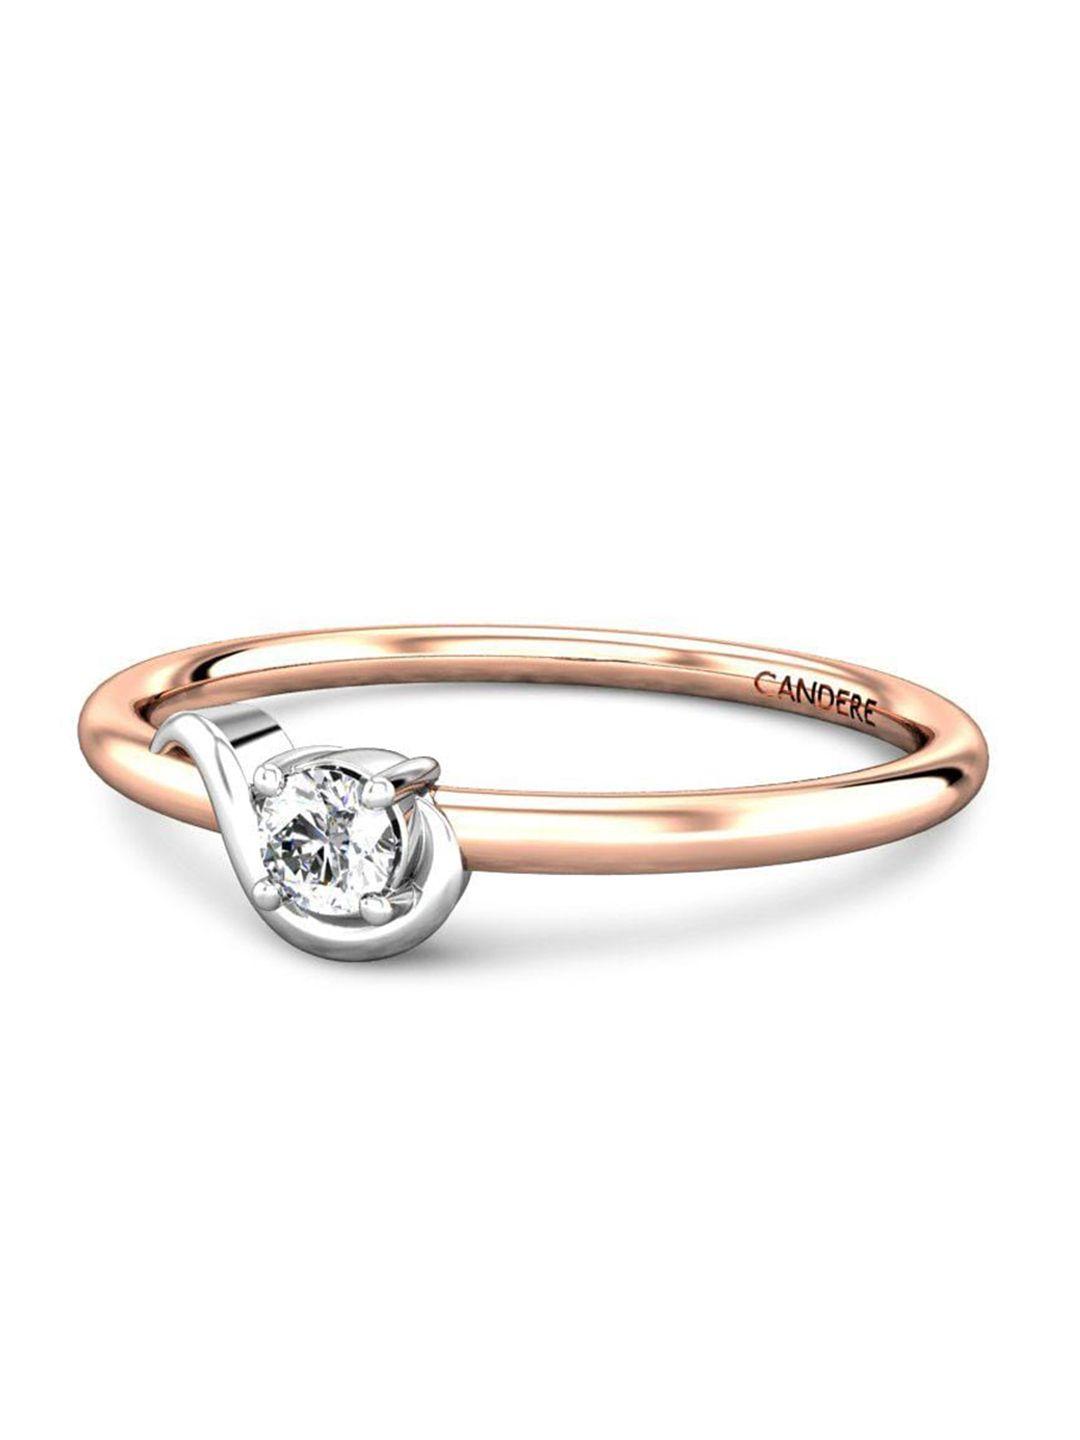 candere a kalyan jewellers company diamond-studded 18kt rose gold ring - 1.07 gm